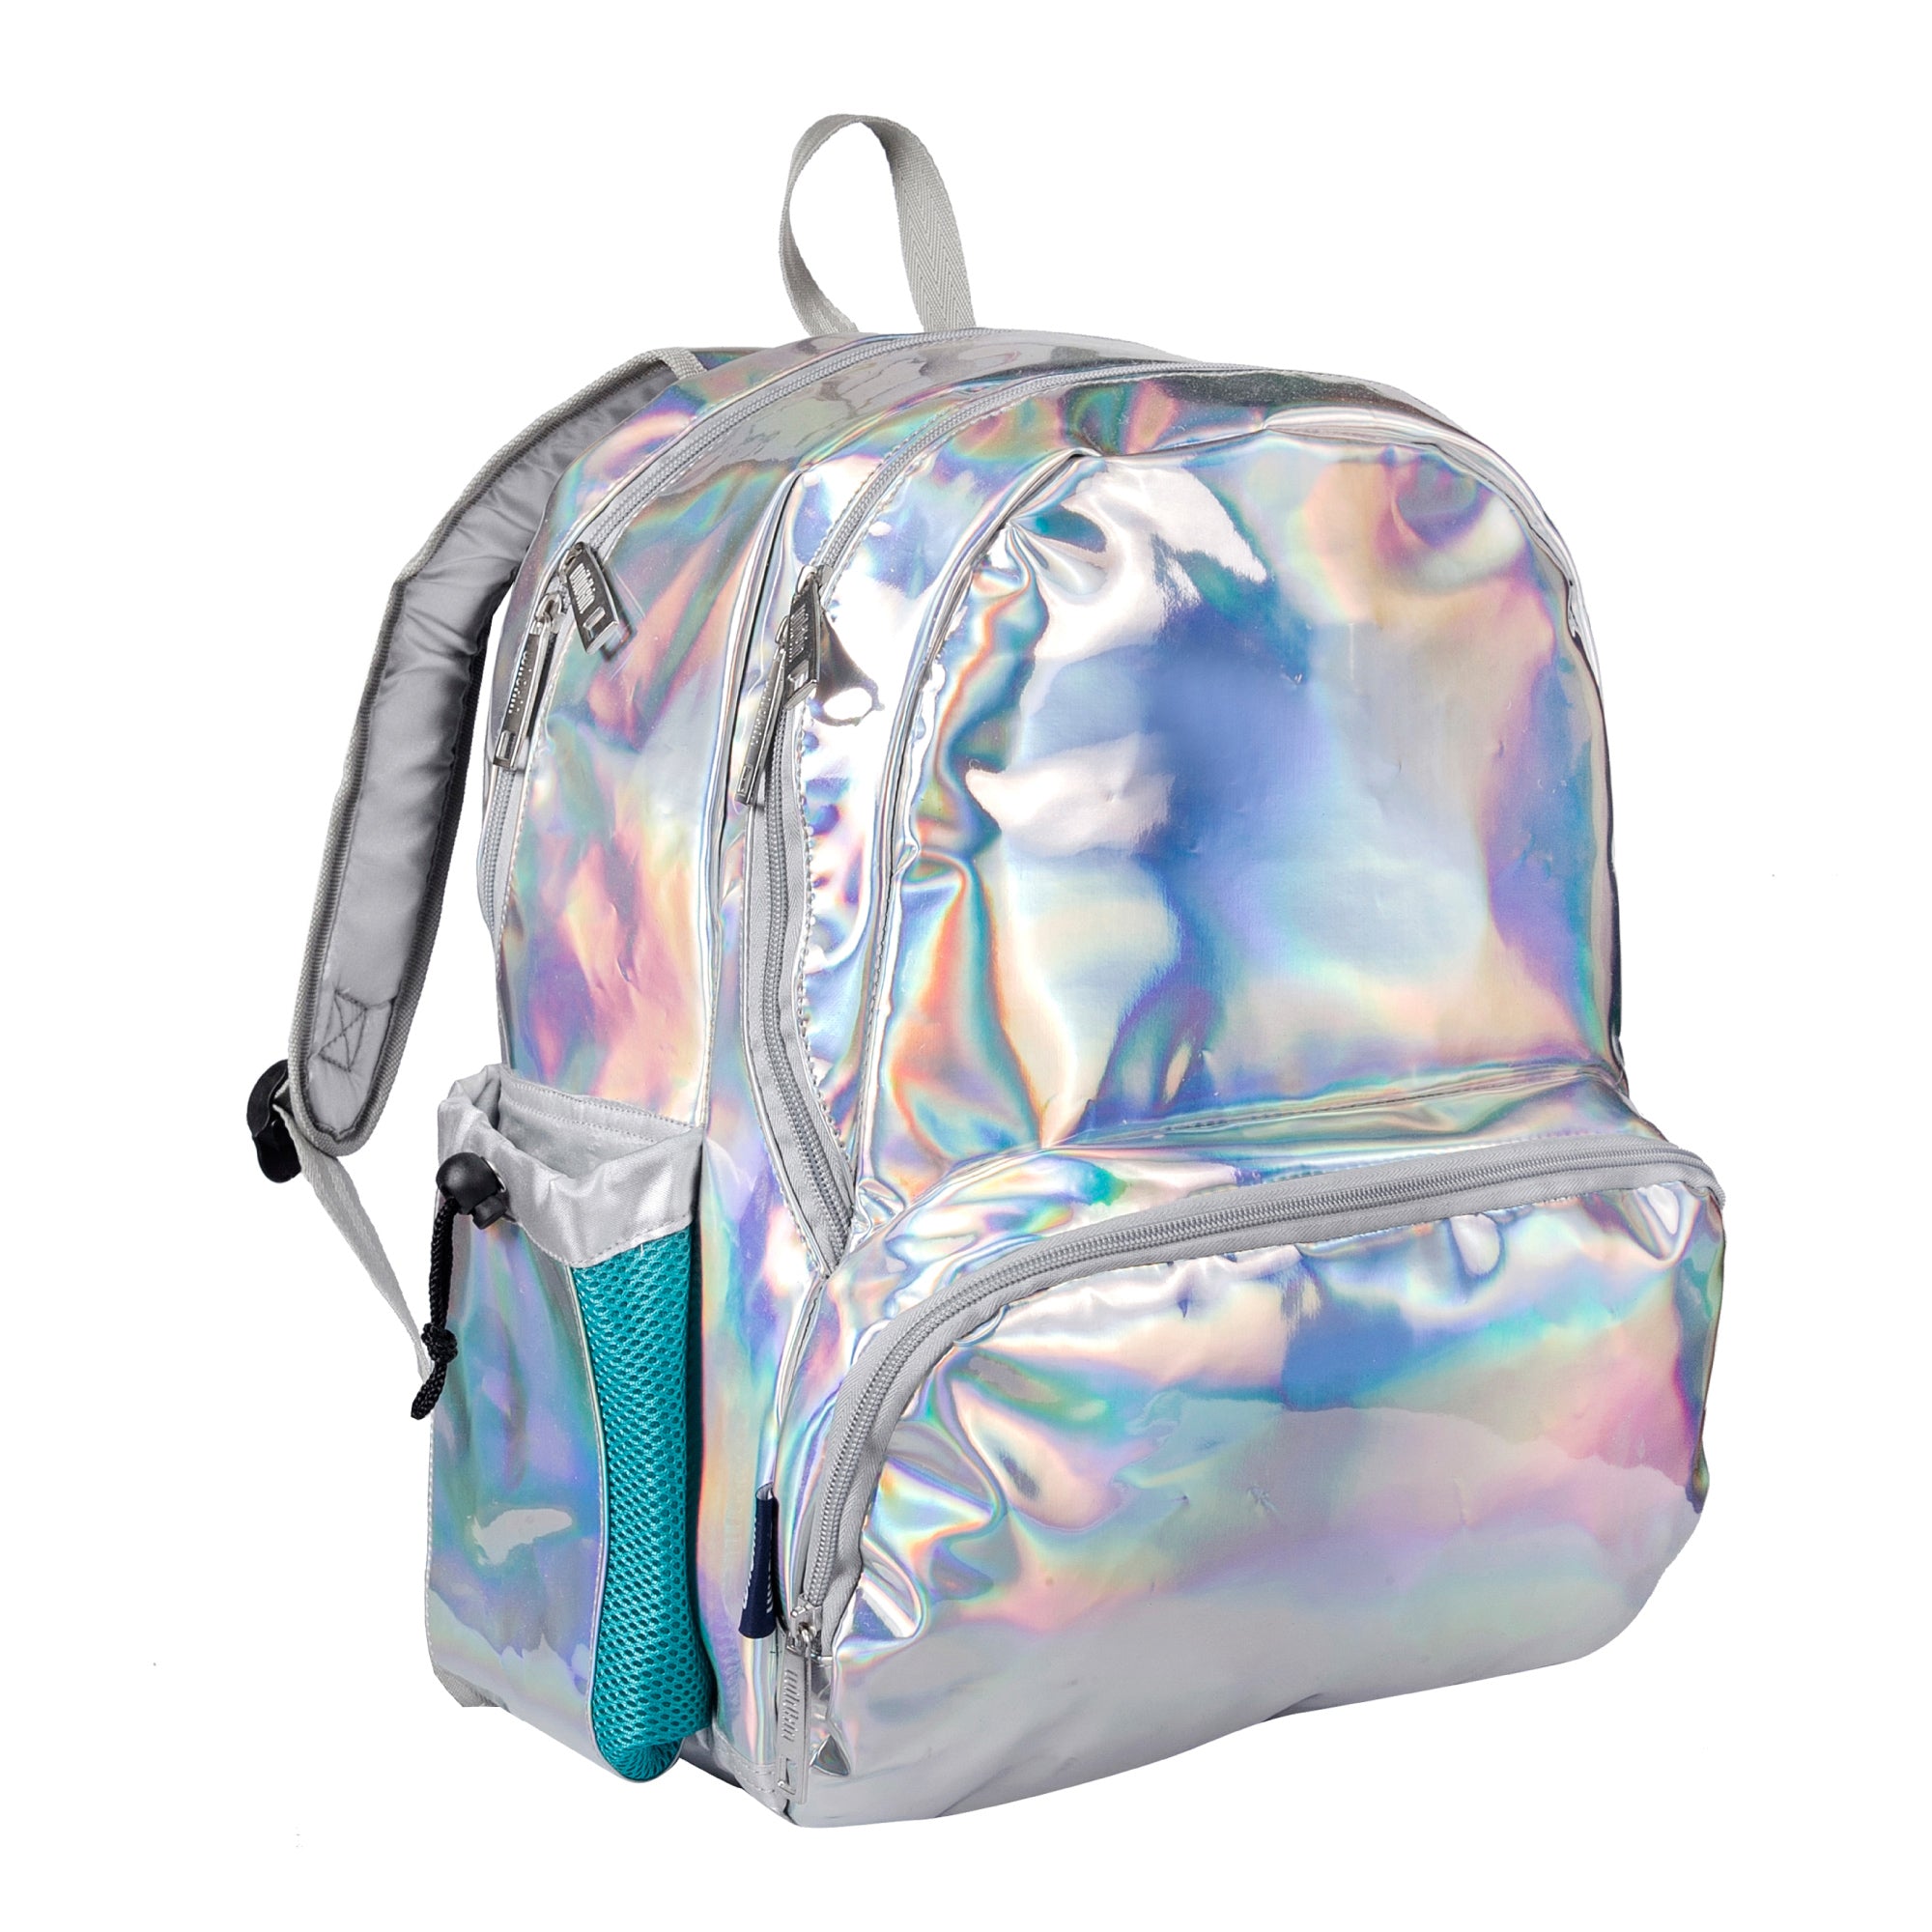 Buy Corceptive Synthetic Geometric Holographic Reflective Backpack | Color  Changing Bag | For Girls And Women at Amazon.in